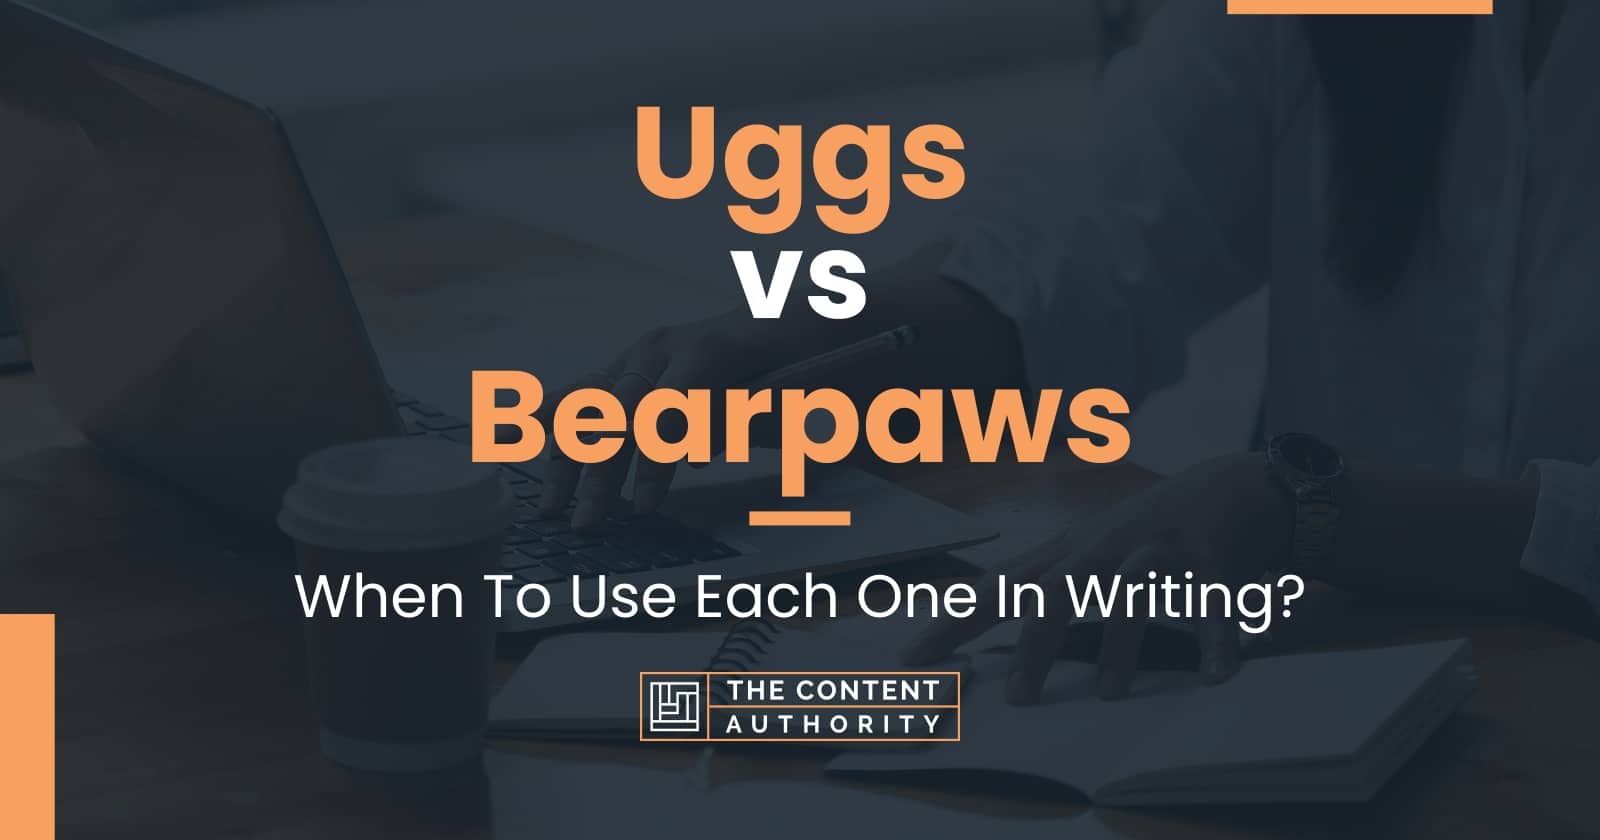 Uggs vs Bearpaws: When To Use Each One In Writing?